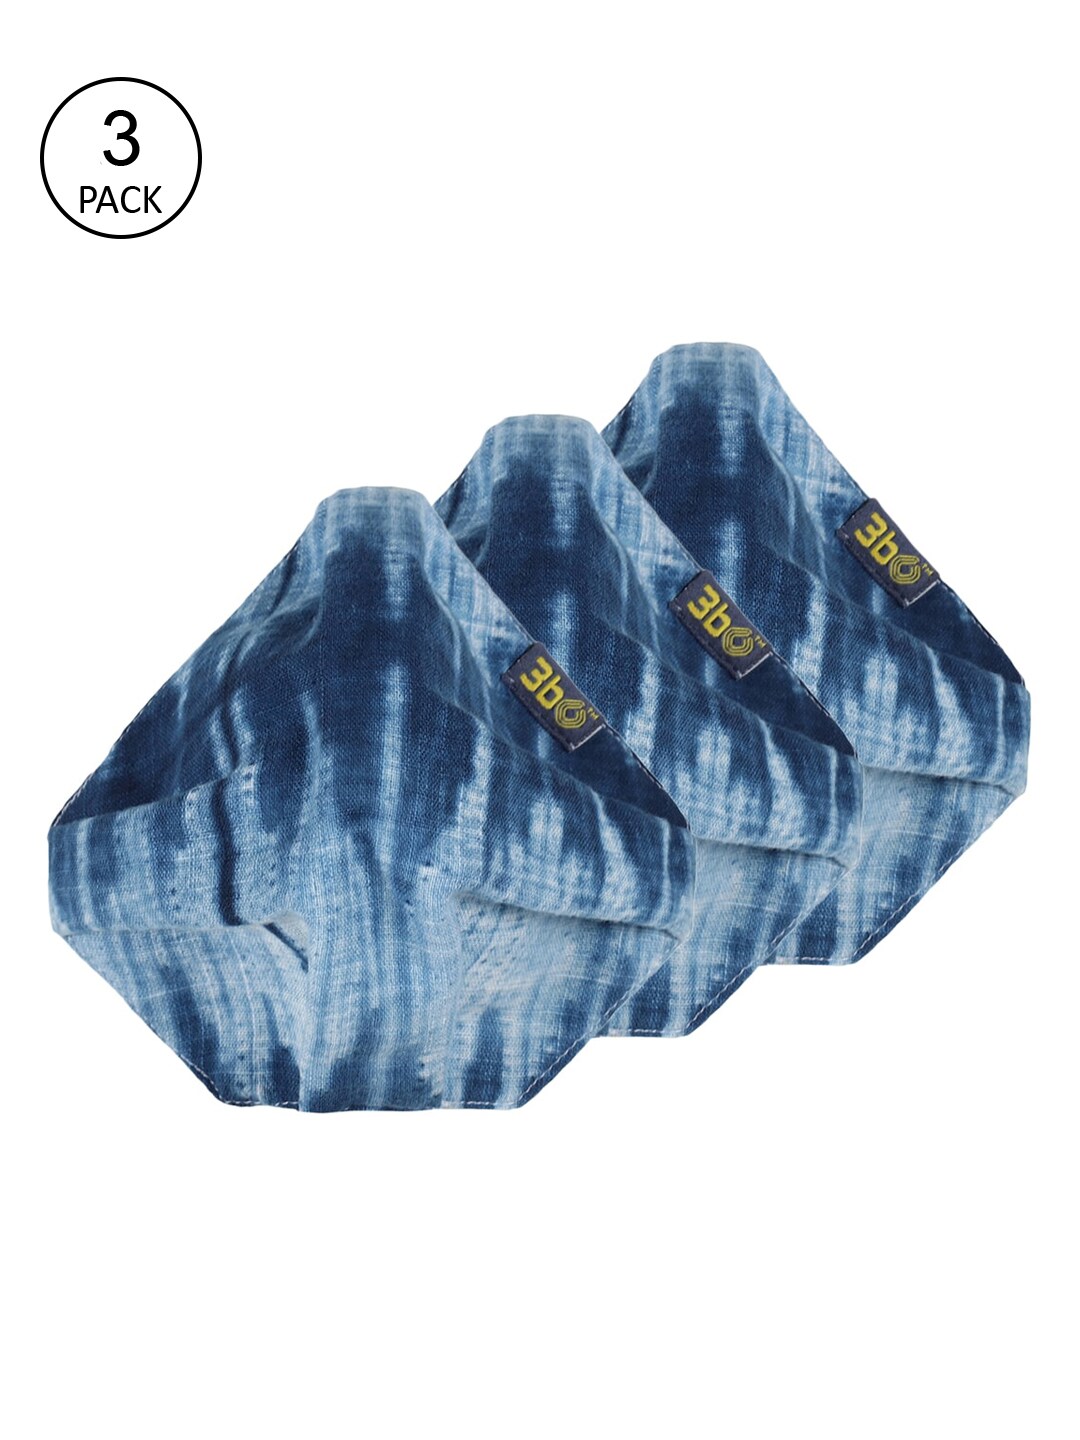 3BO Pack of 3 Blue & White Printed 3-Ply 3BO Deltoid Anti Pollution Reusable Face Masks Price in India